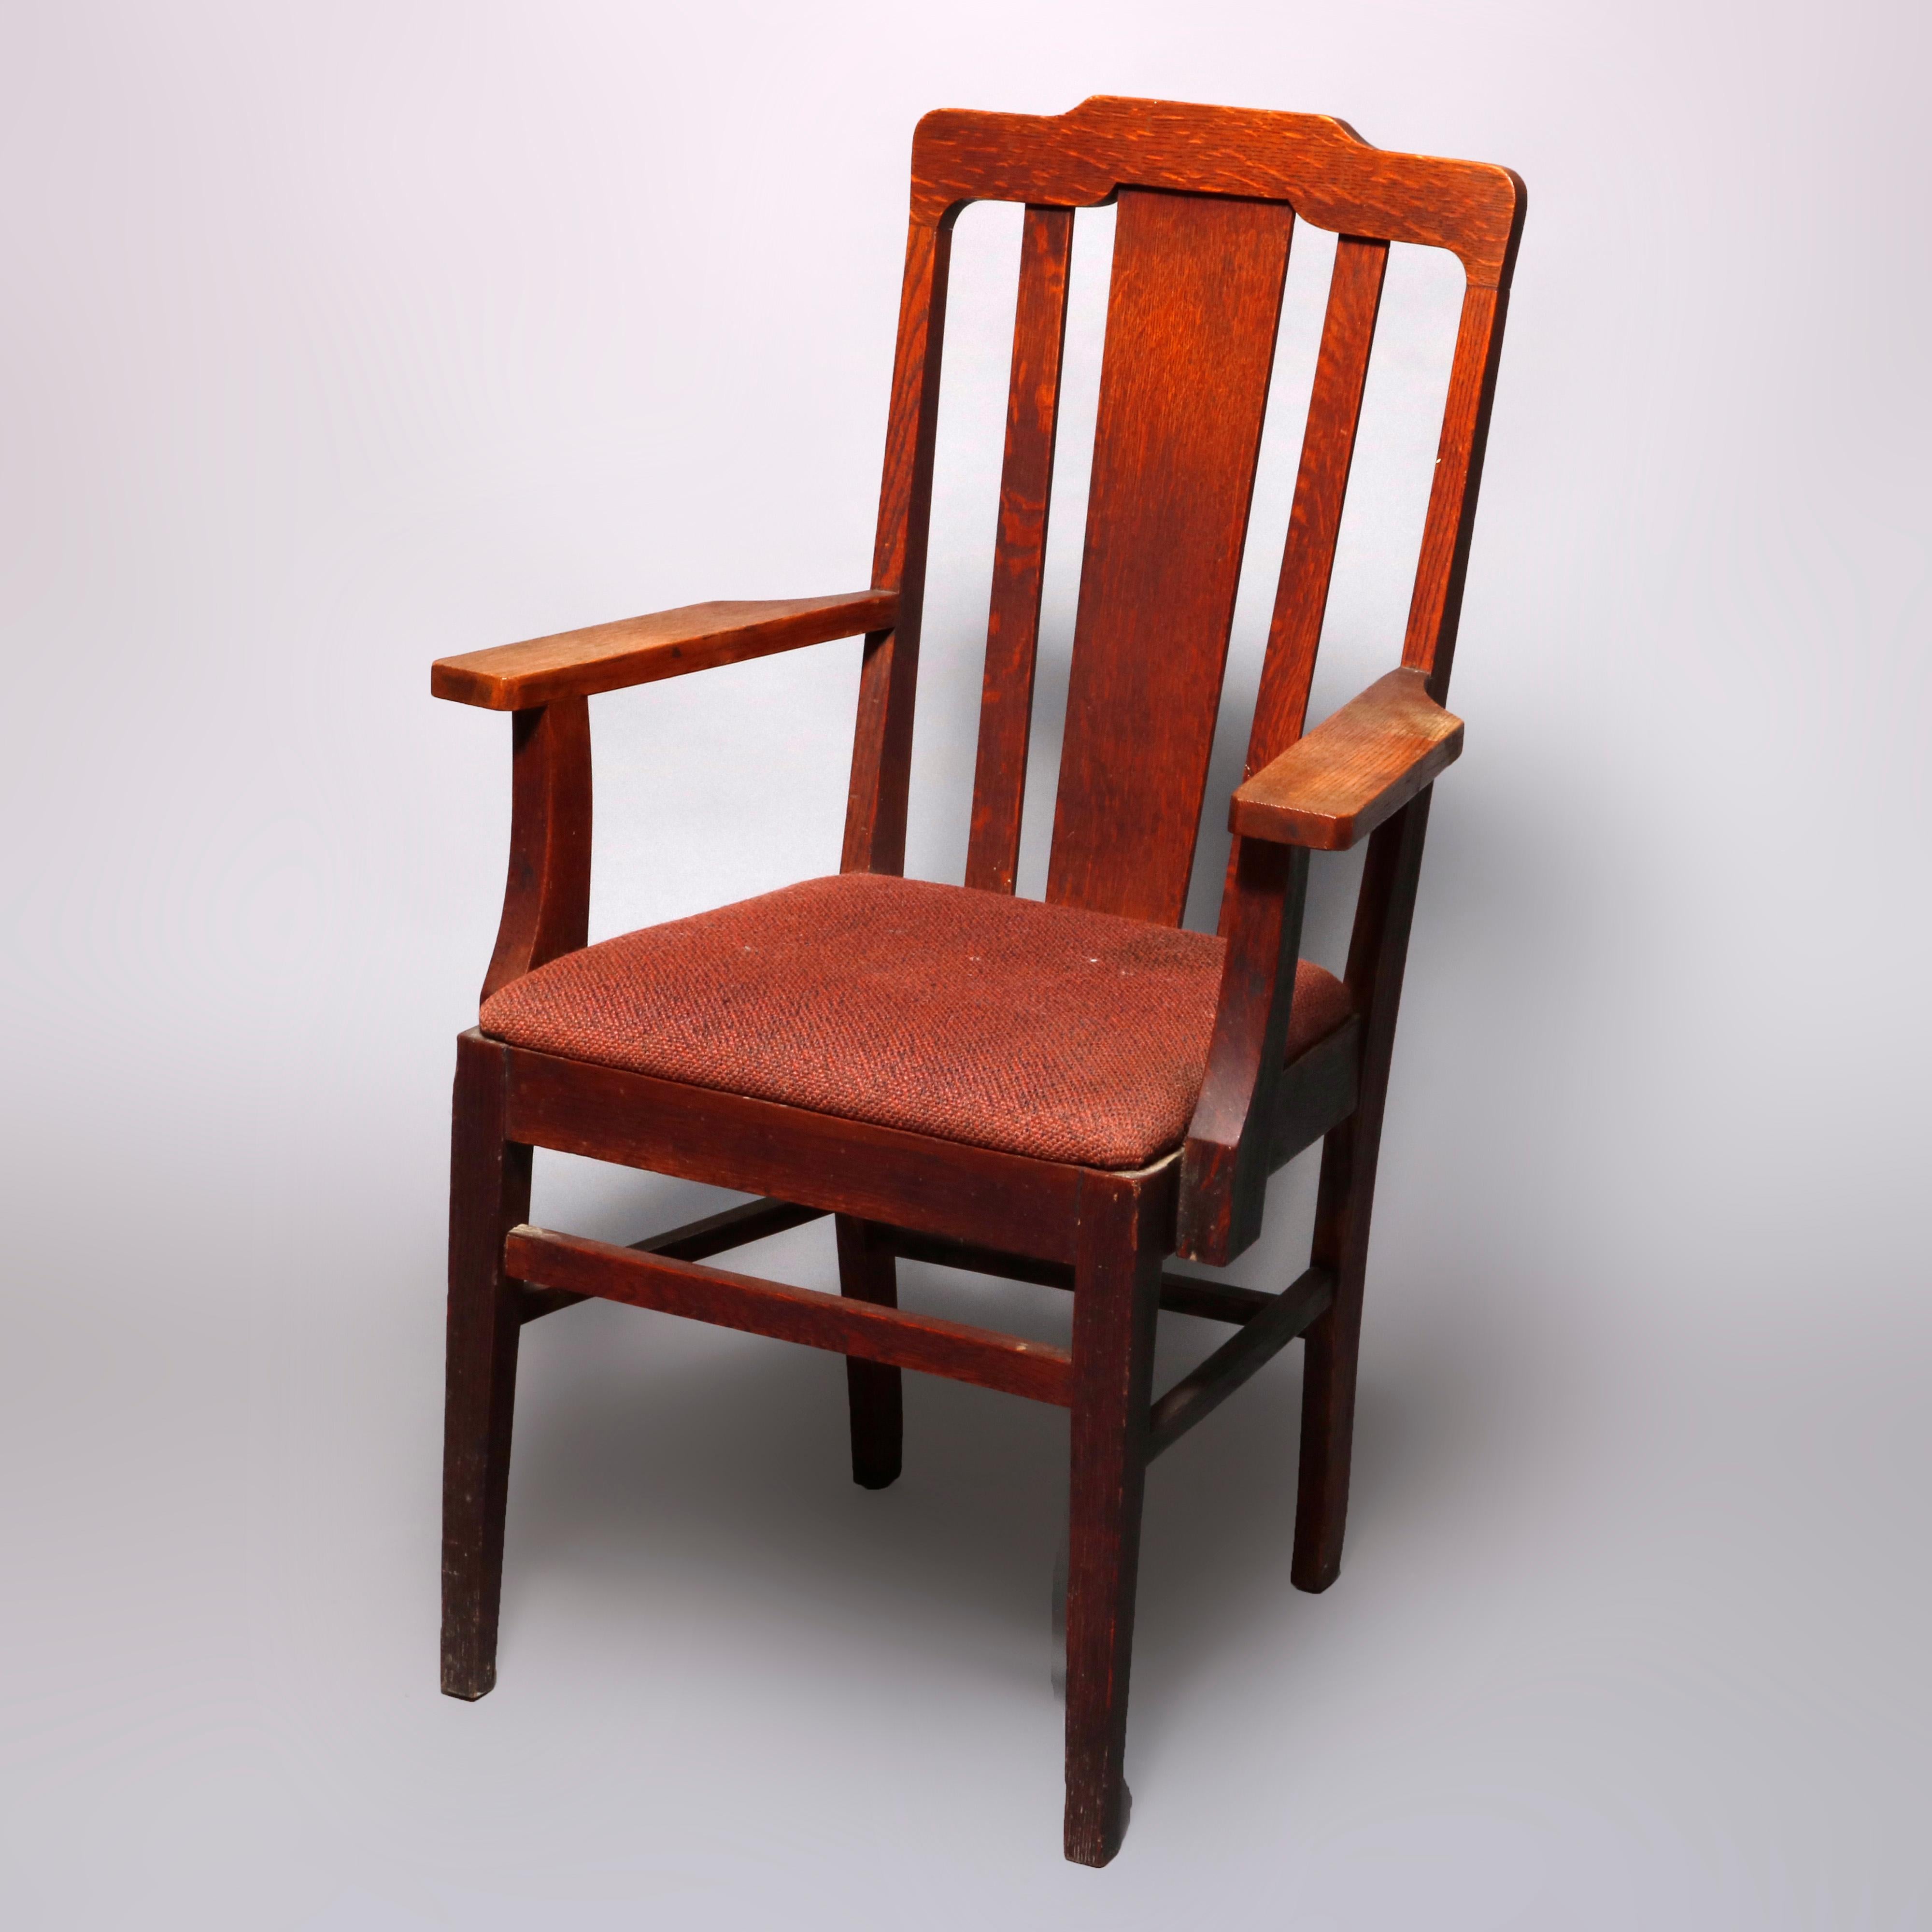 An antique set of 4 Arts & Crafts mission oak dining chairs in the manner of Gustav Stickley offer shaped rail surmounting slat backs and raised on square and straight legs, includes one armchair and three side chairs, circa 1910

Measures: Master